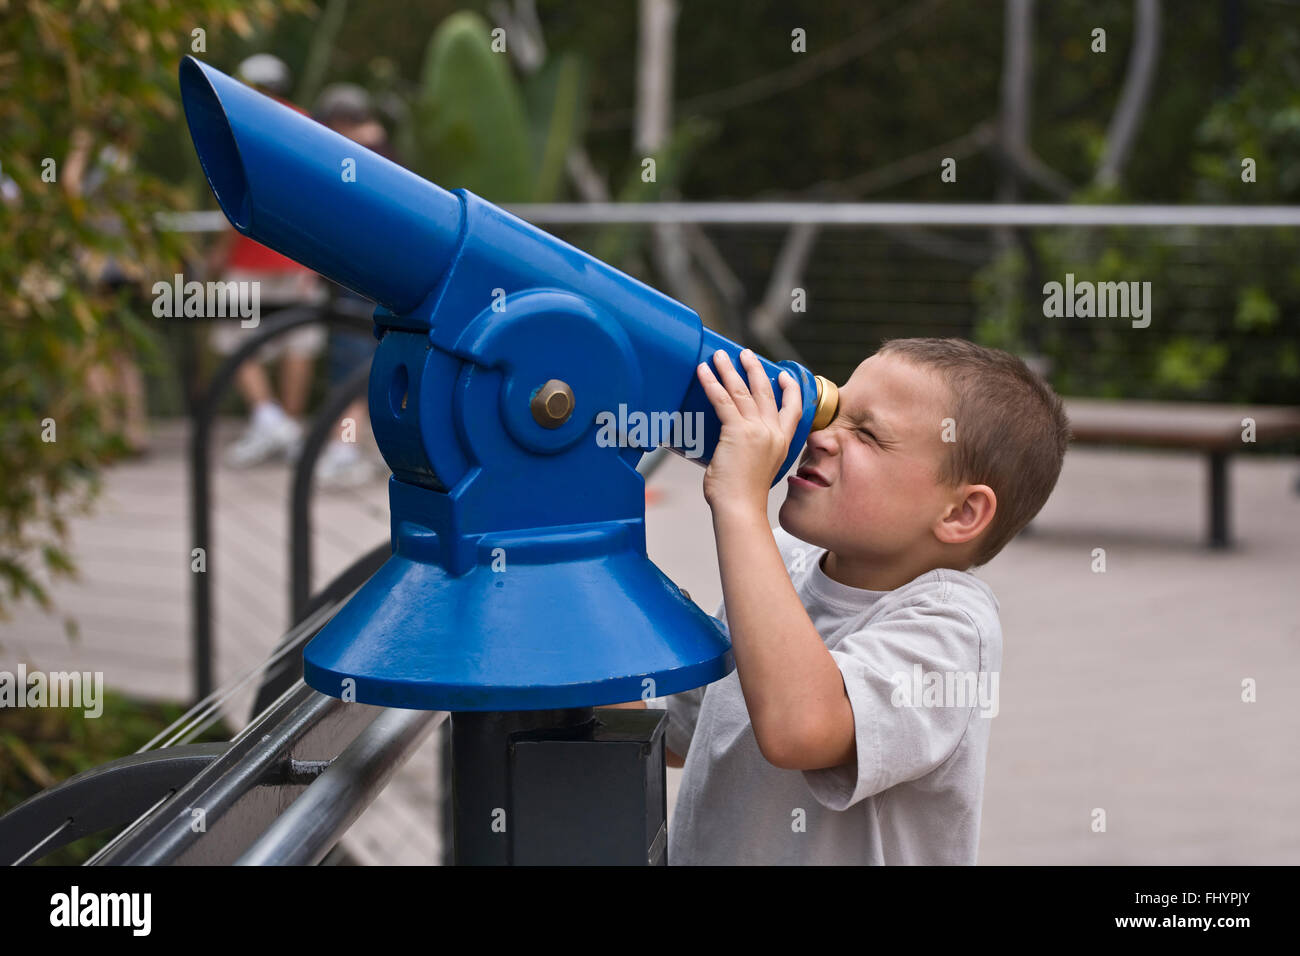 A young boy uses a telescope at the SAN DIEGO ZOO - CALIFORNIA Stock Photo